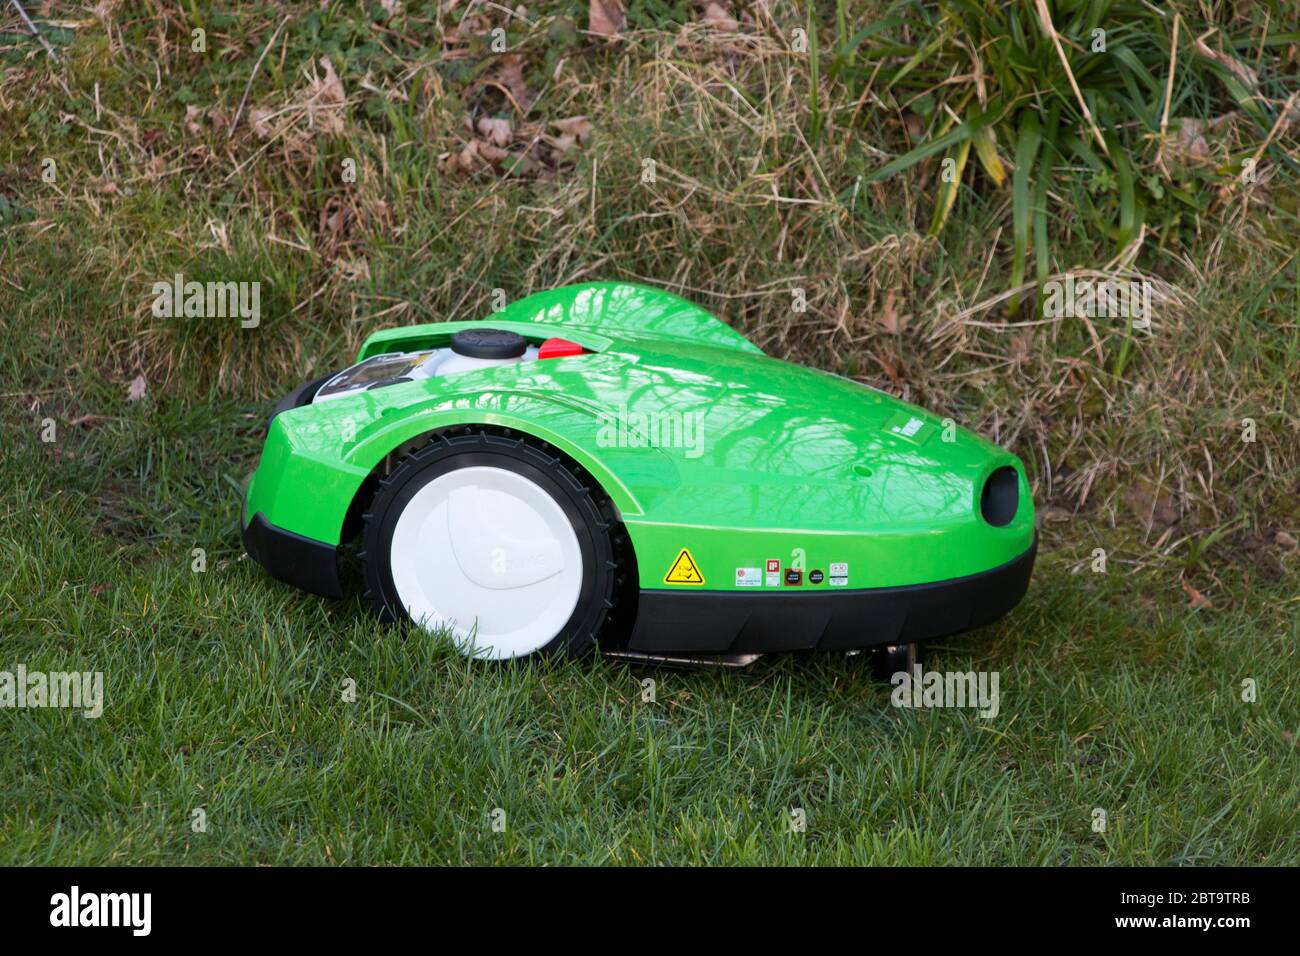 imow lawn mower automatic robotic mower Stock Photo